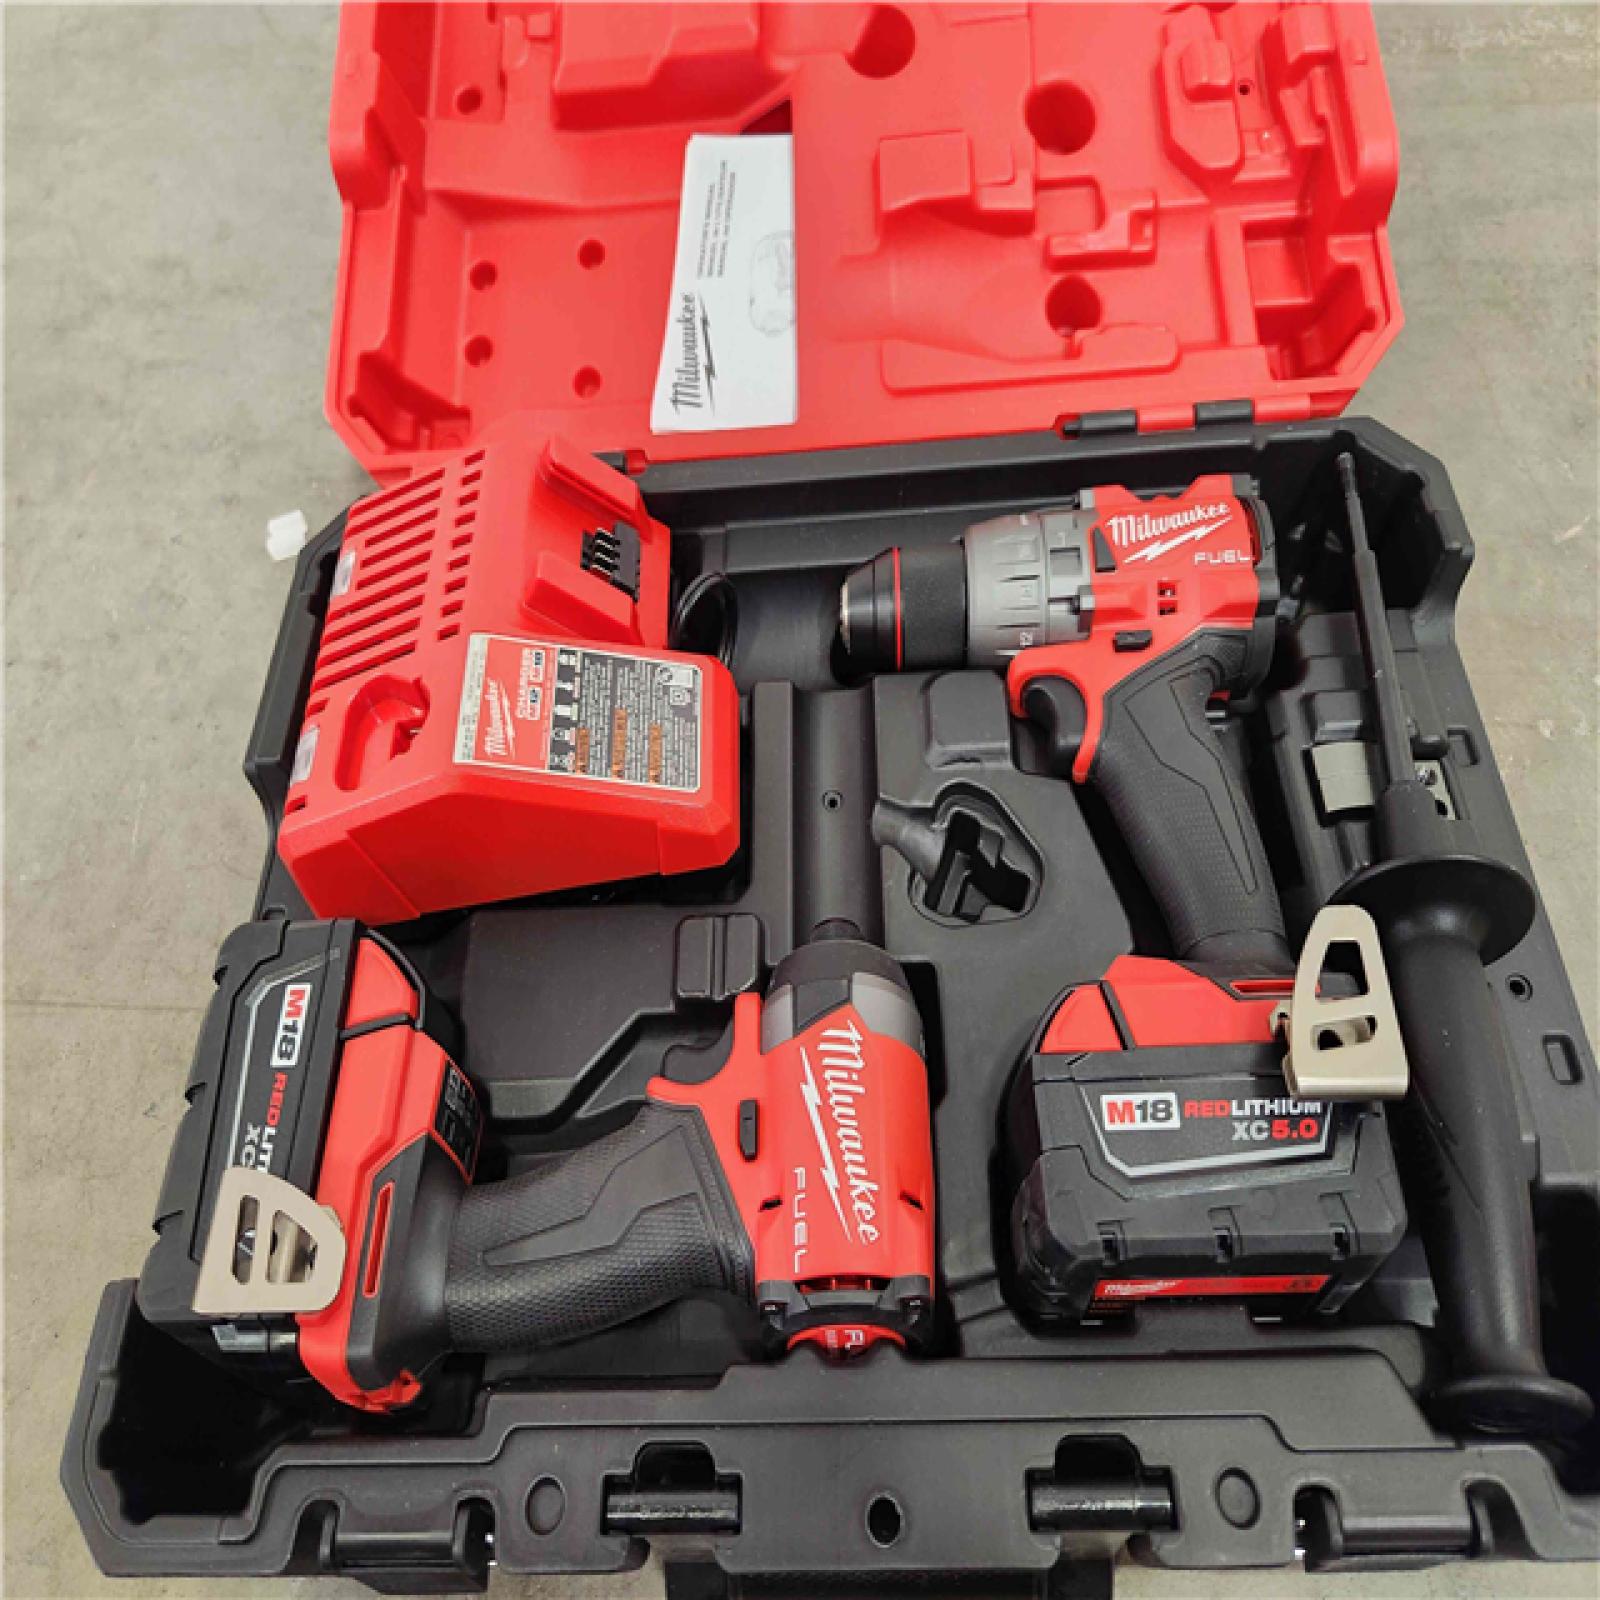 Phoenix Location NEW Milwaukee M18 FUEL Cordless Brushless 2 Tool Hammer Drill and Impact Driver Kit 18 Volt 5 Amps 0314-25